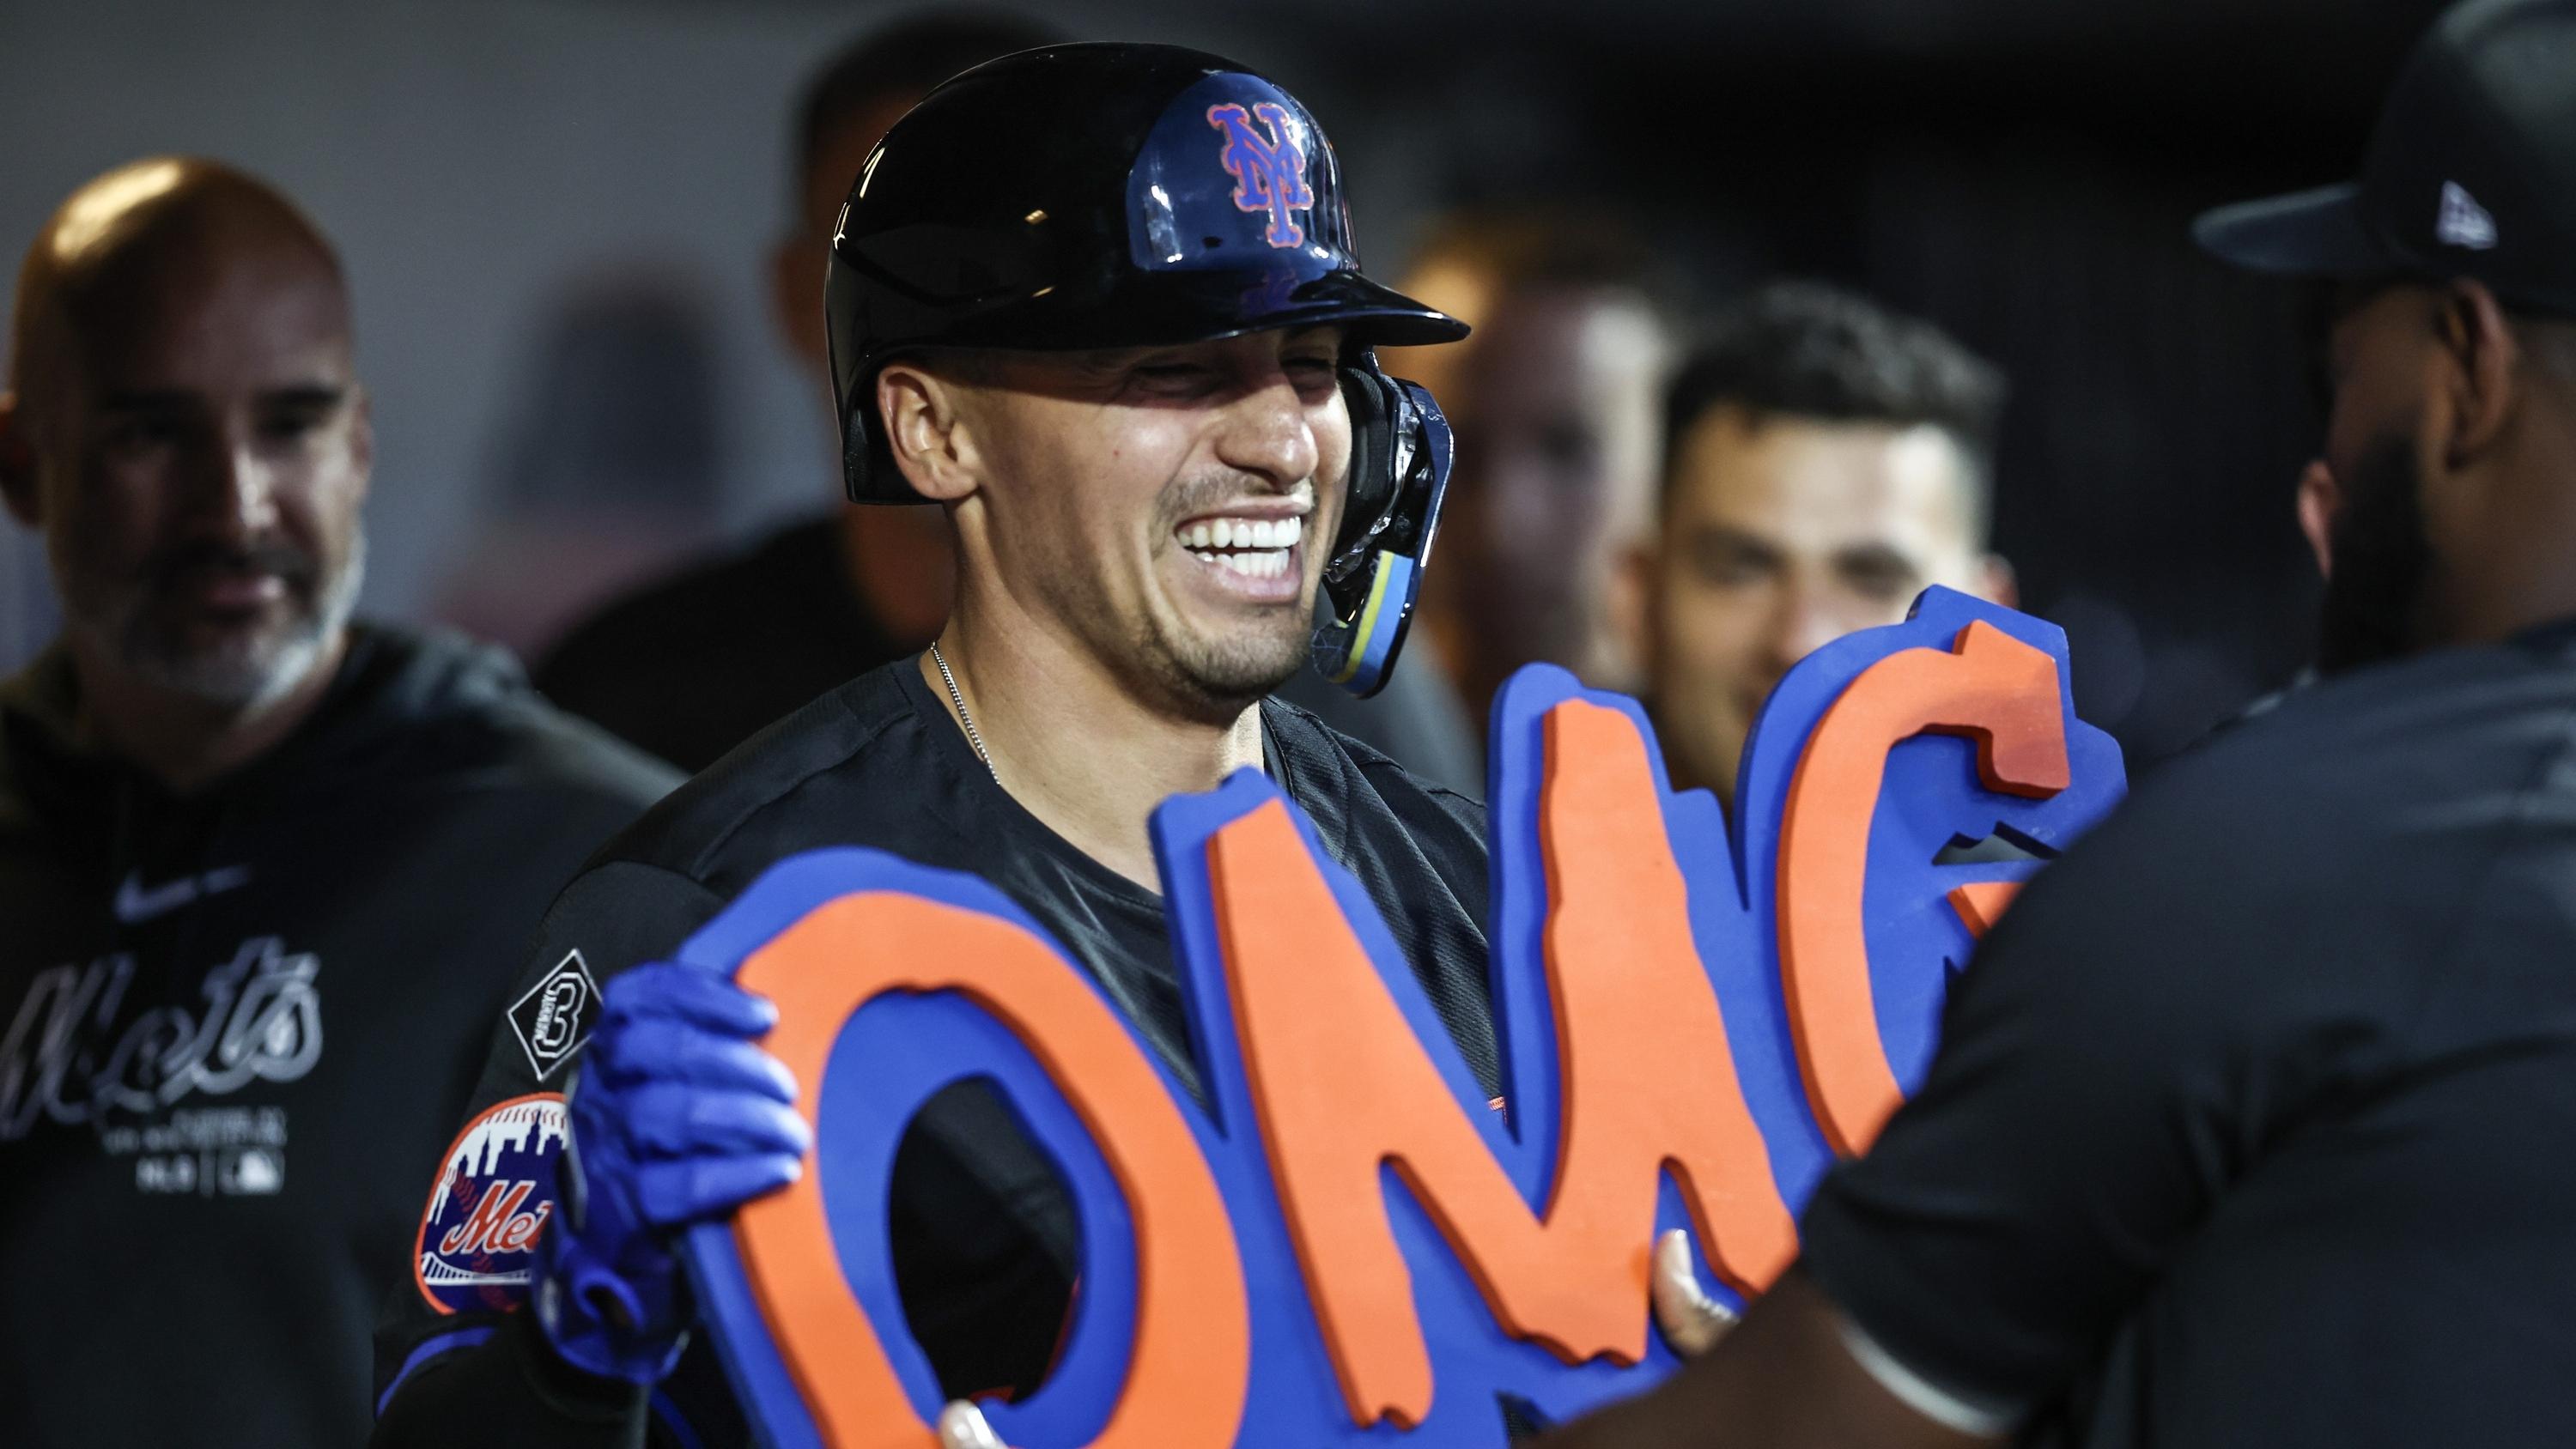 The story behind Mets' new OMG sign used in home run celebrations